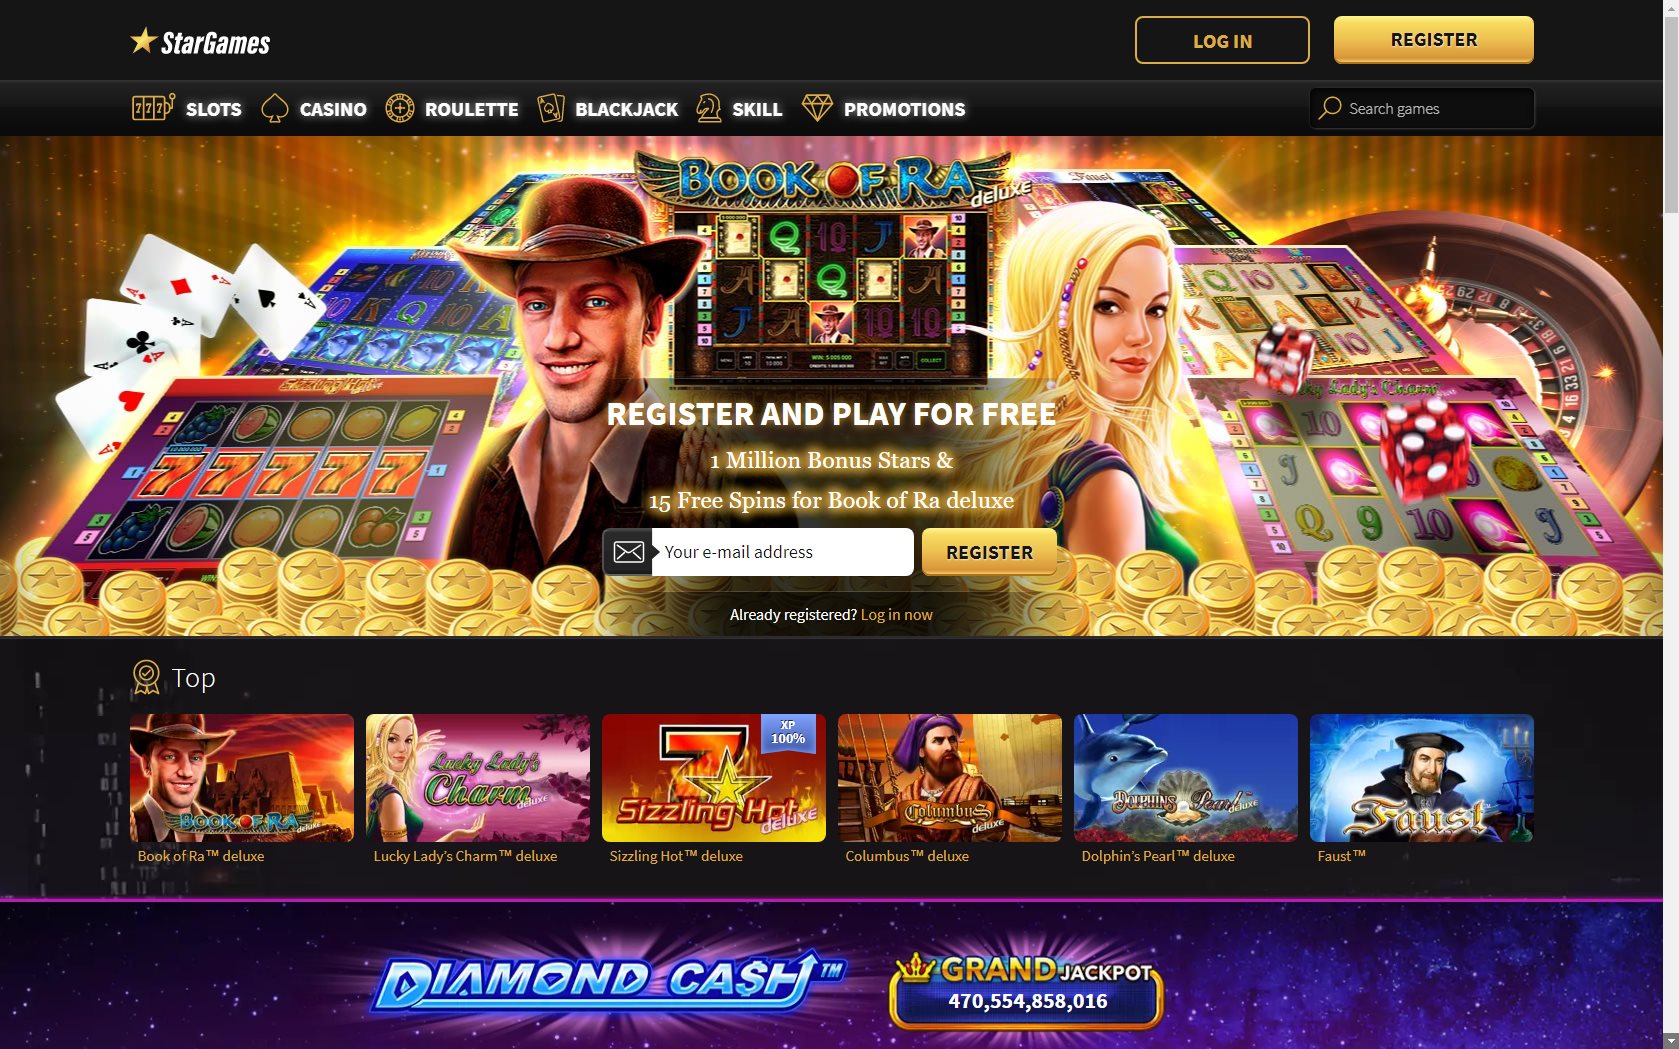 Star Games Casino Review